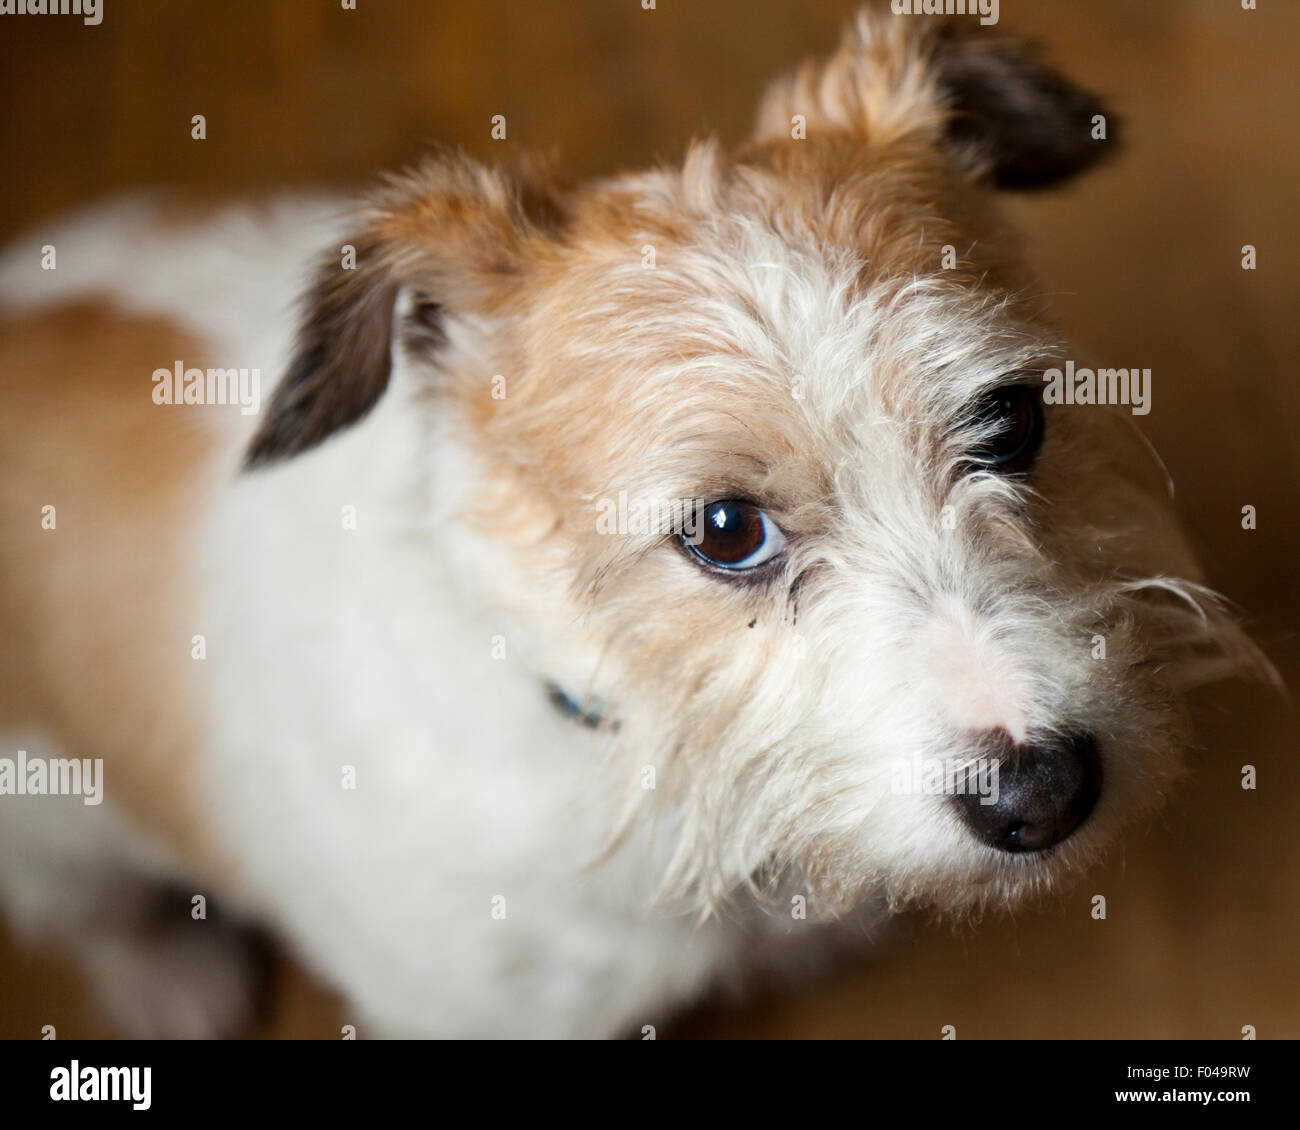 miniature long haired jack russell